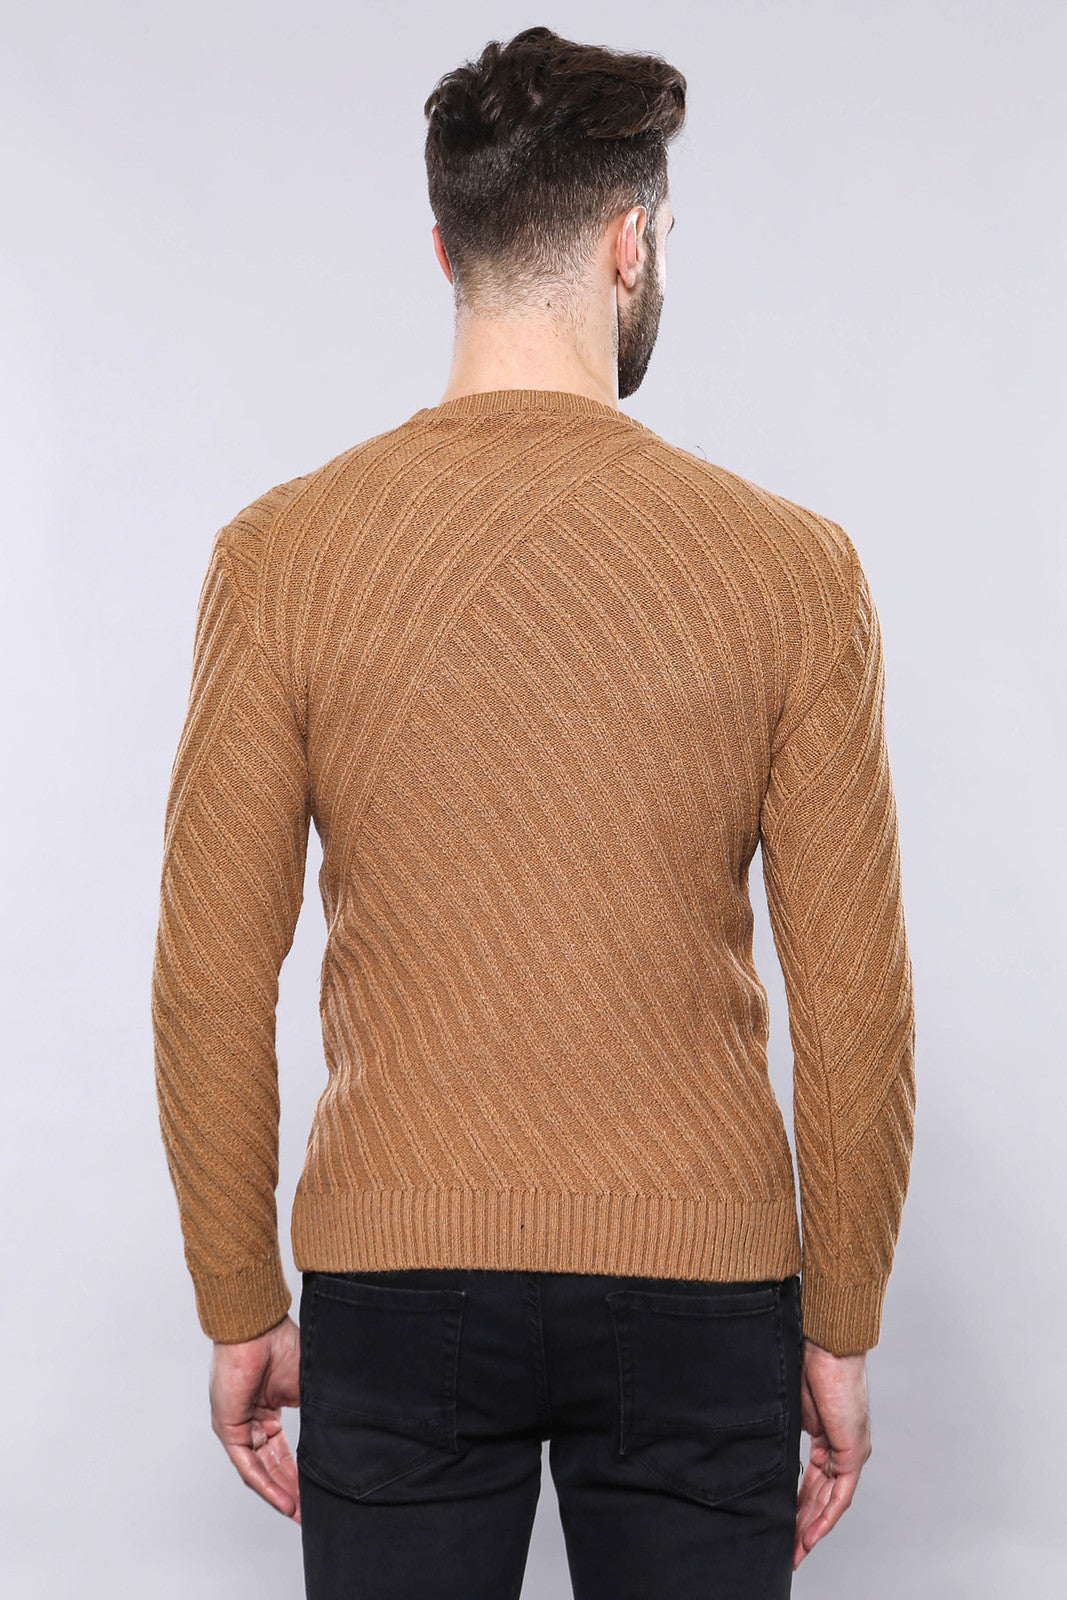 Patterned Circle Neck Tawny Sweater | Wessi